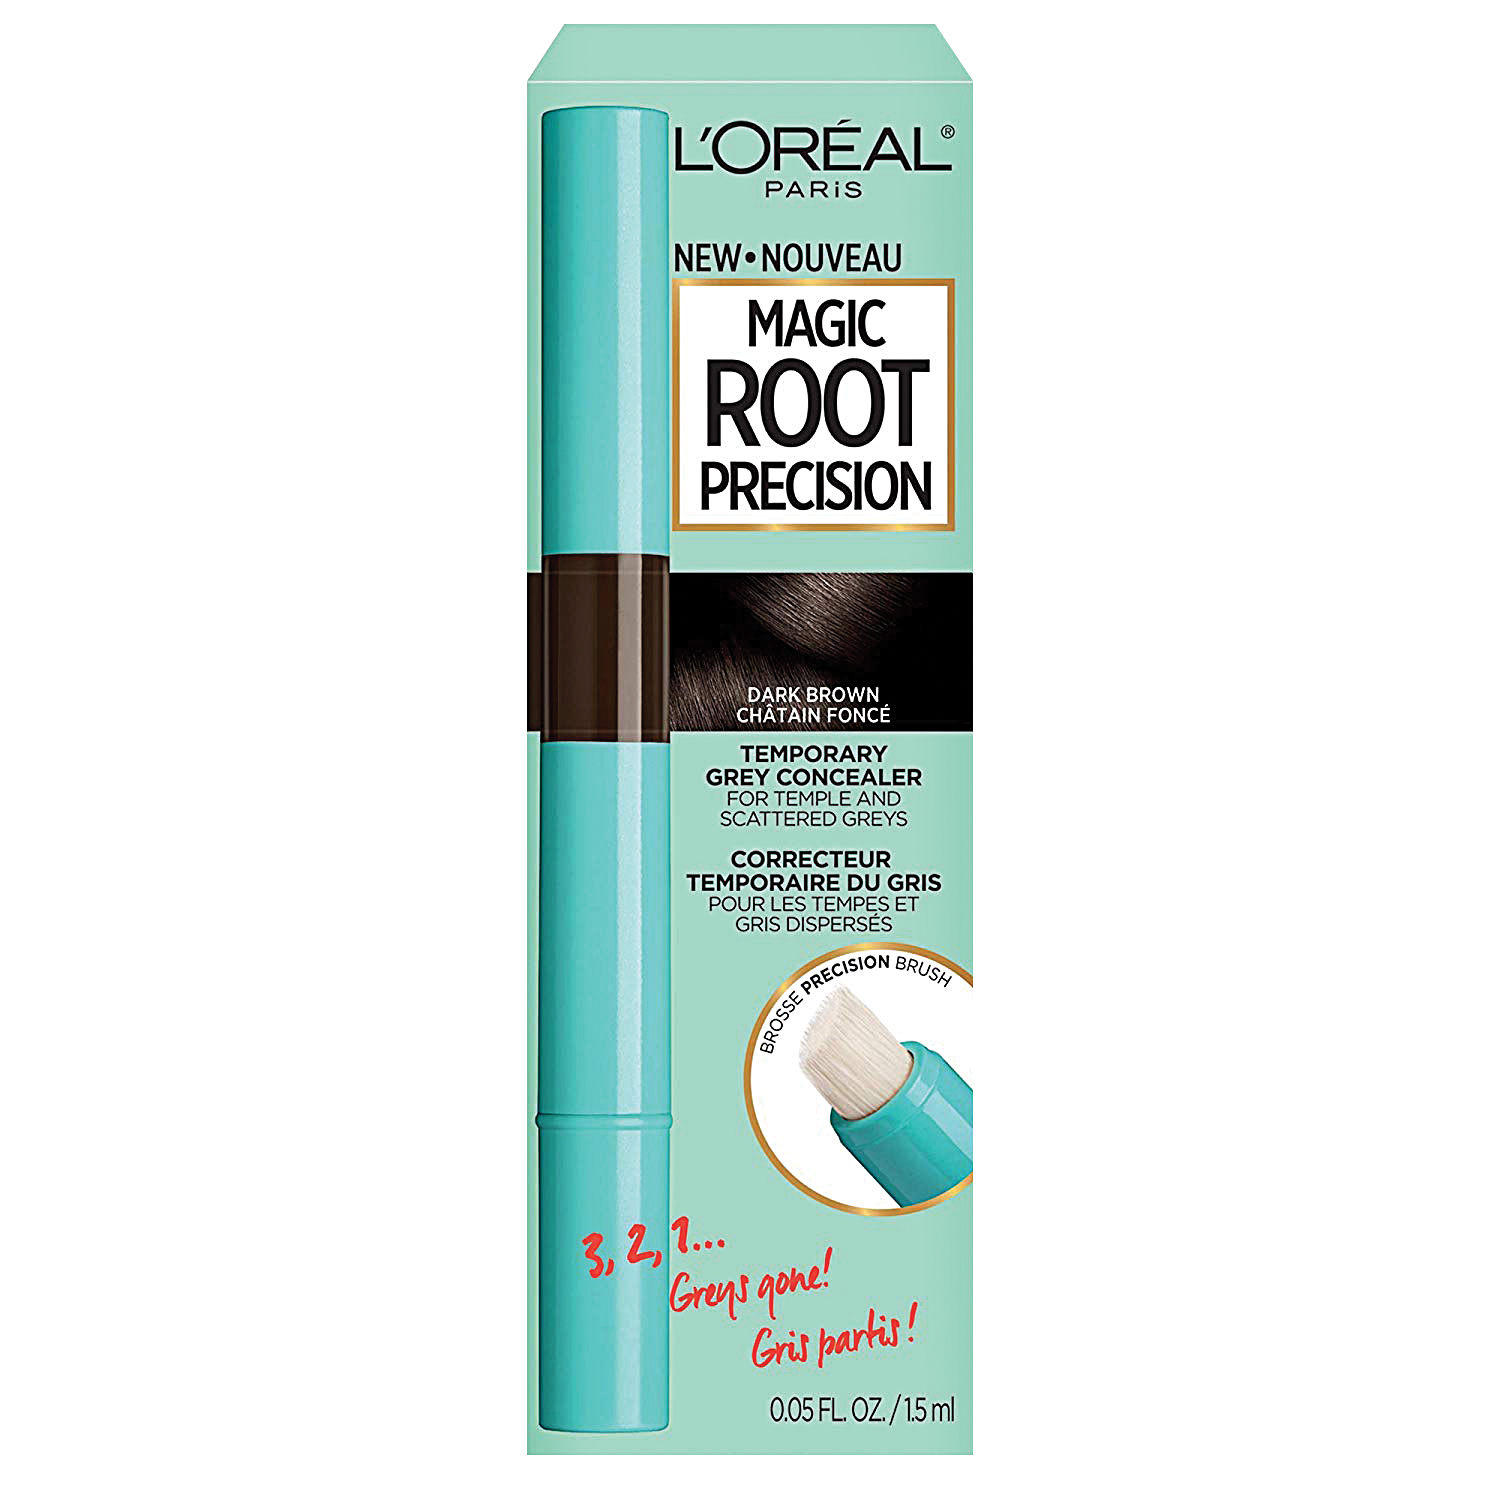 A box of L'Oreal Magic Root Precision Temporary Concealer against a white background